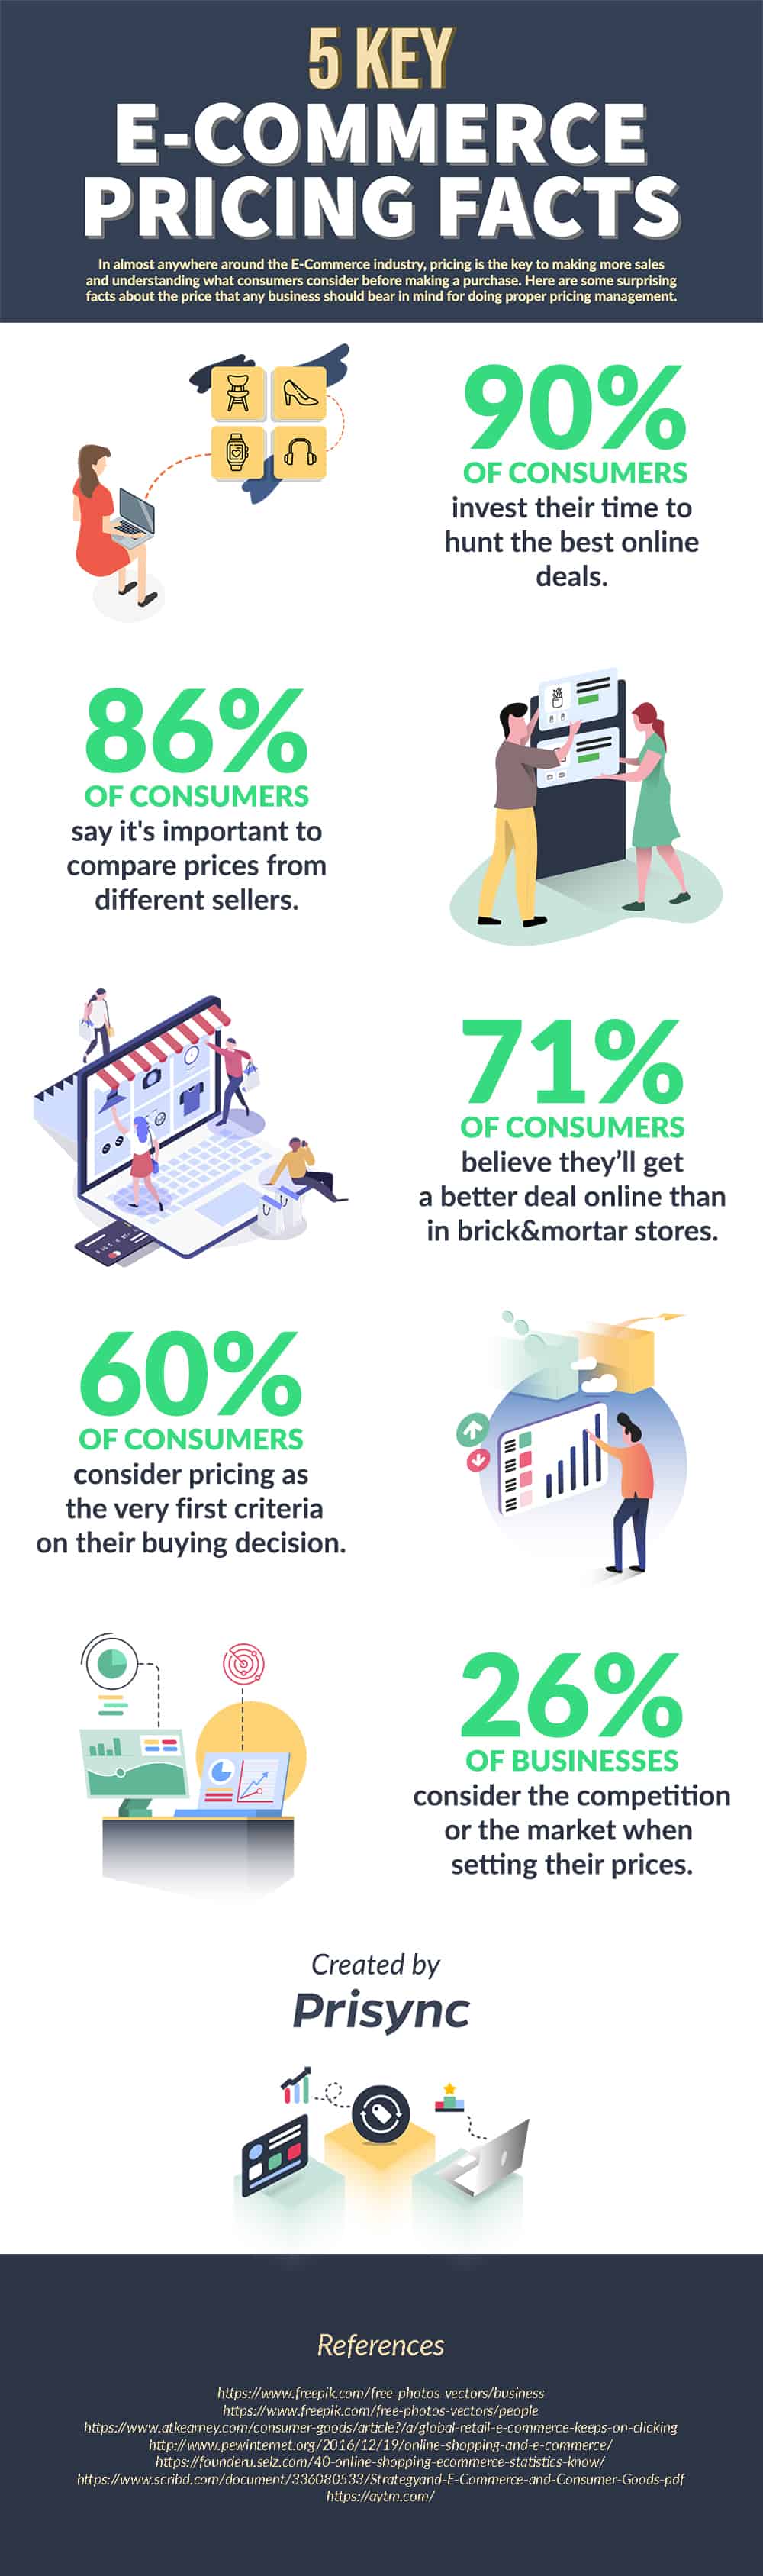 E-commerce Pricing Facts